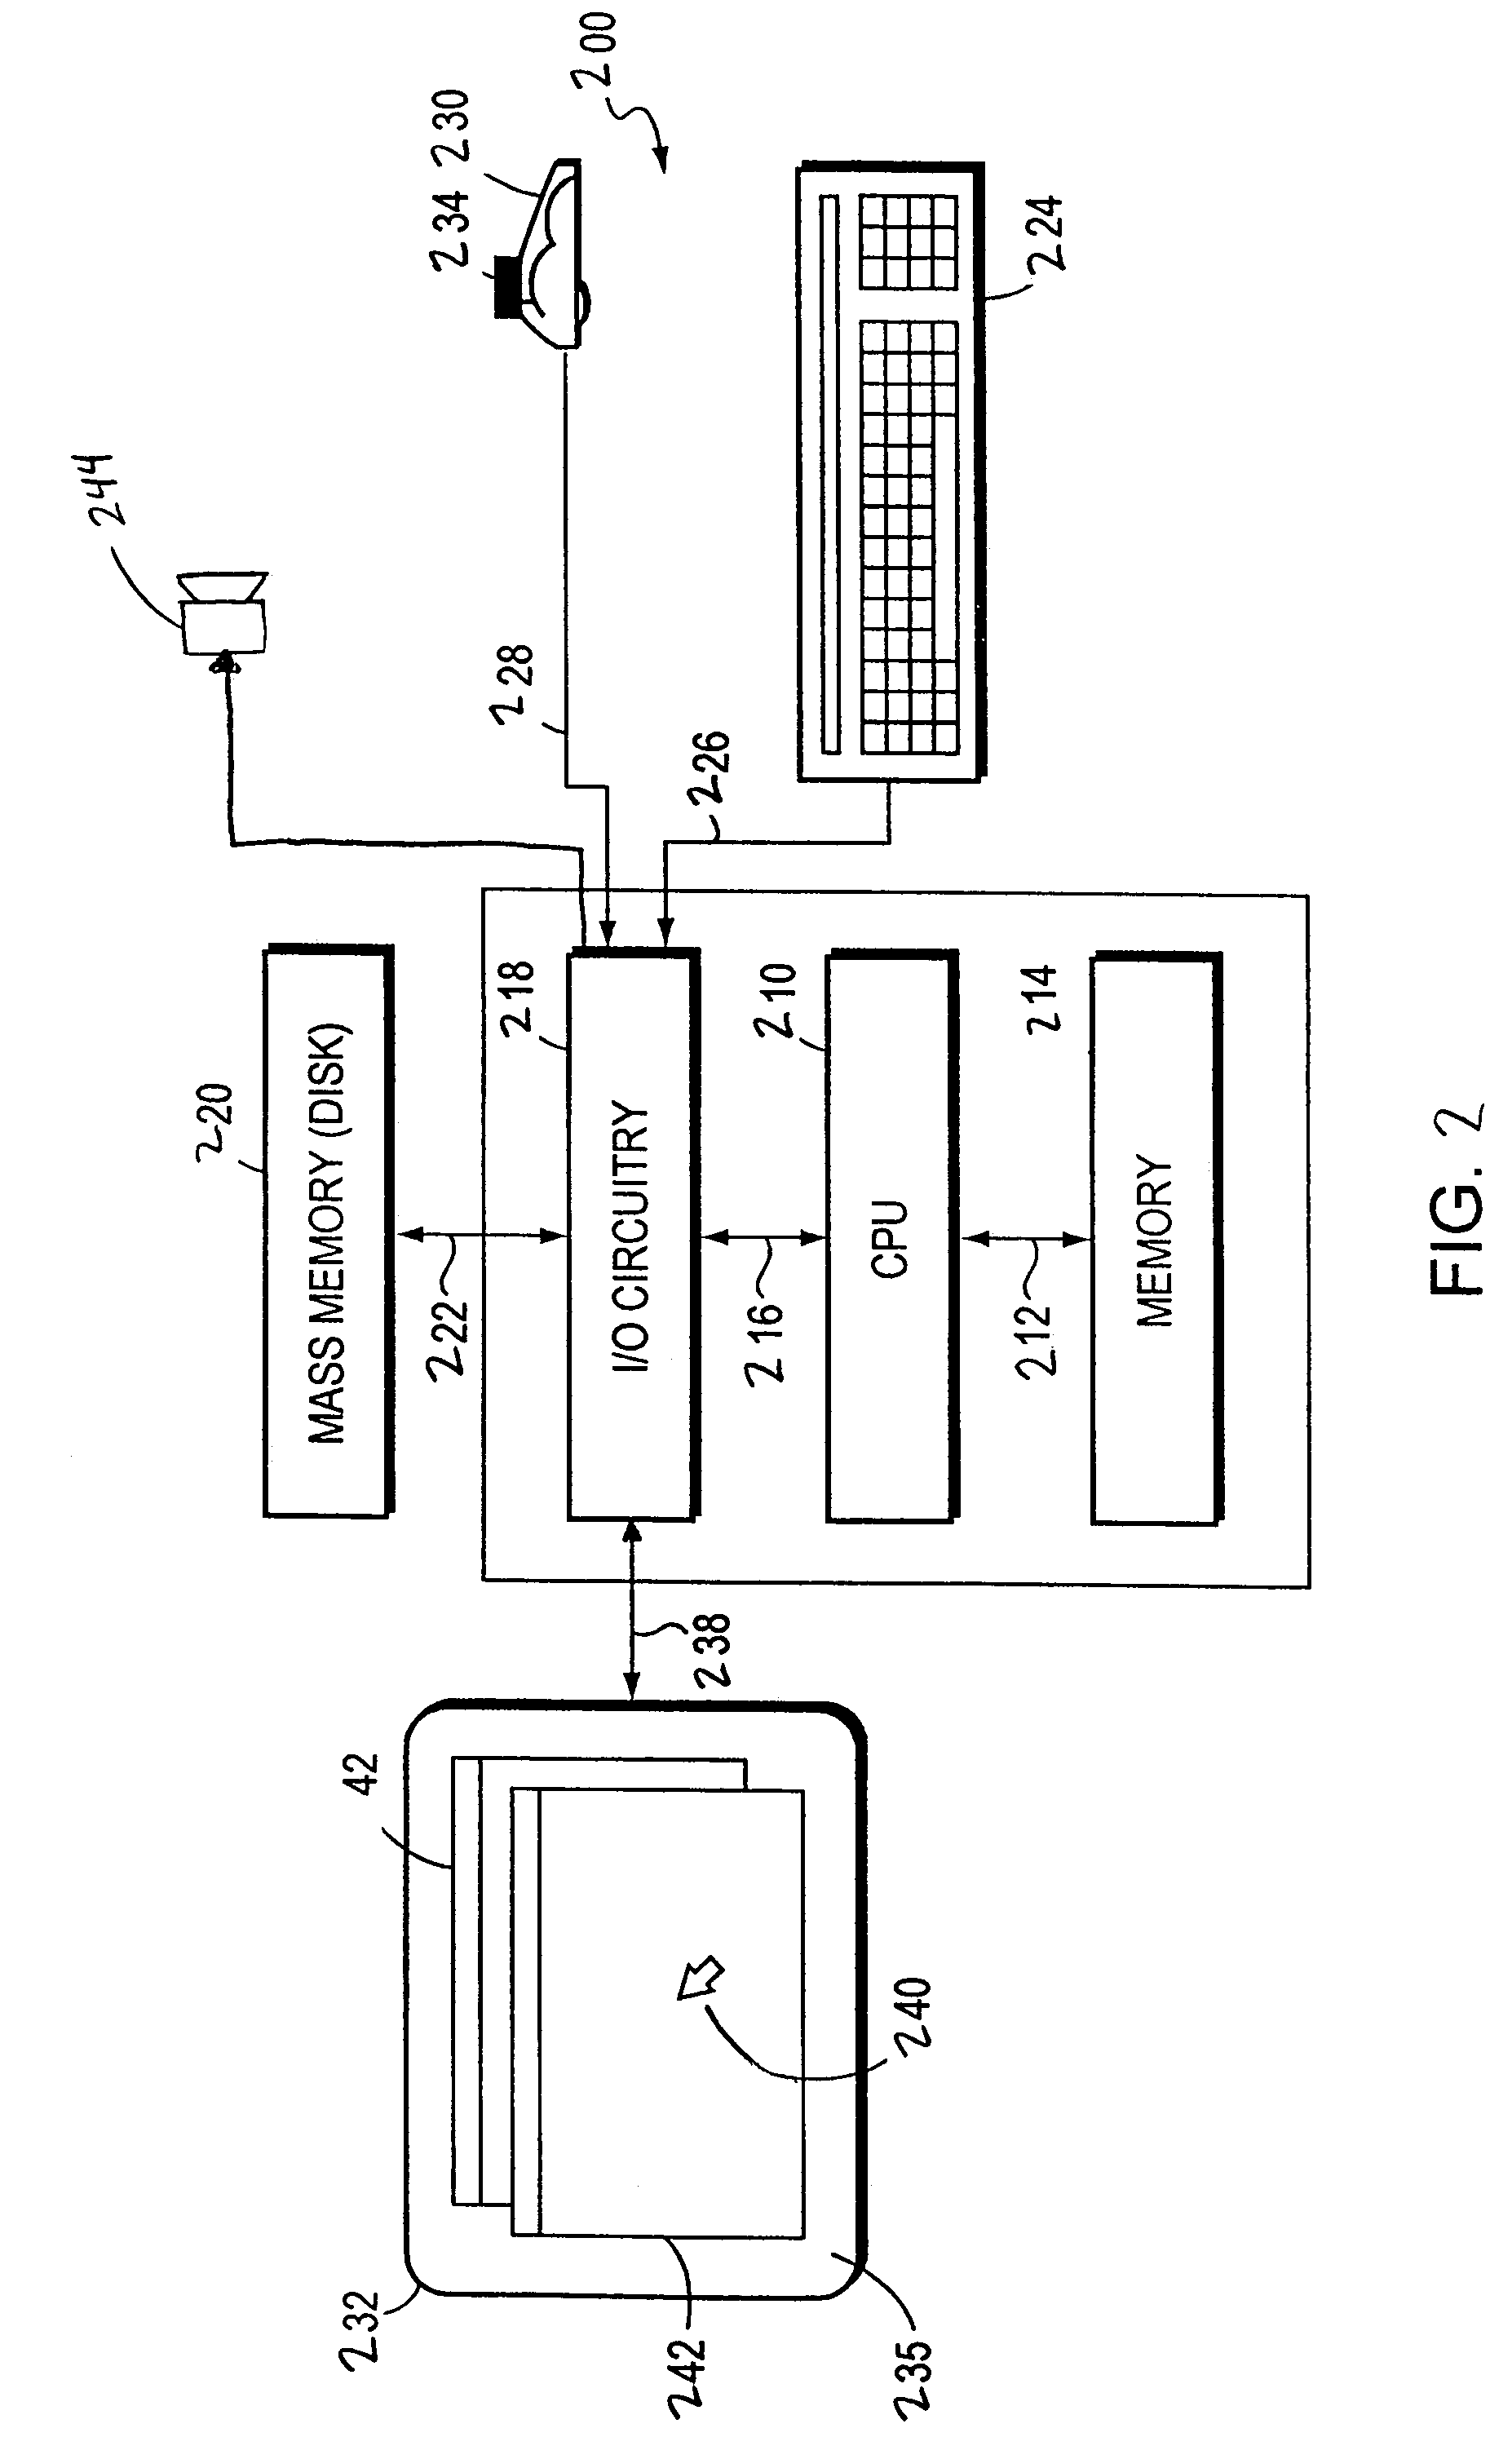 Method and apparatus for detecting and resolving circularflow paths in graphical programming systems